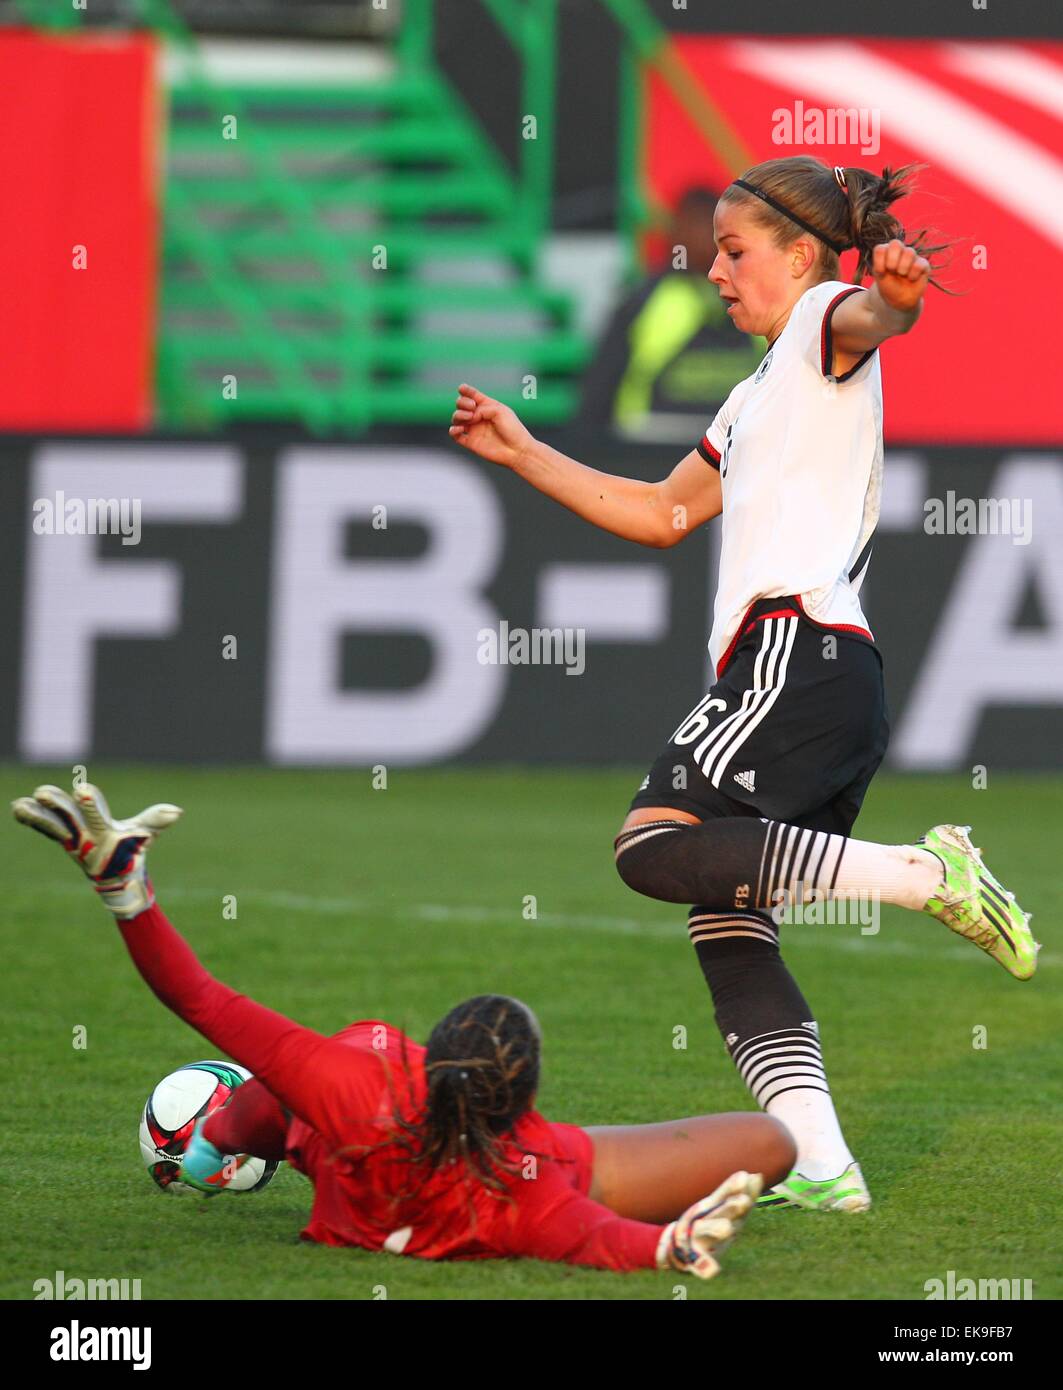 Fuerth, Germany. 08th Apr, 2015. Germany's Melanie Leupolz in action against Brazil's goalkeeper Barbara shortly before scoring the 3-0 during the women's international friendly soccer match between Germany and Brazil in Fuerth, Germany, 08 April 2015. Photo: KARL-JOSEF HILDENBRAND/dpa/Alamy Live News Stock Photo